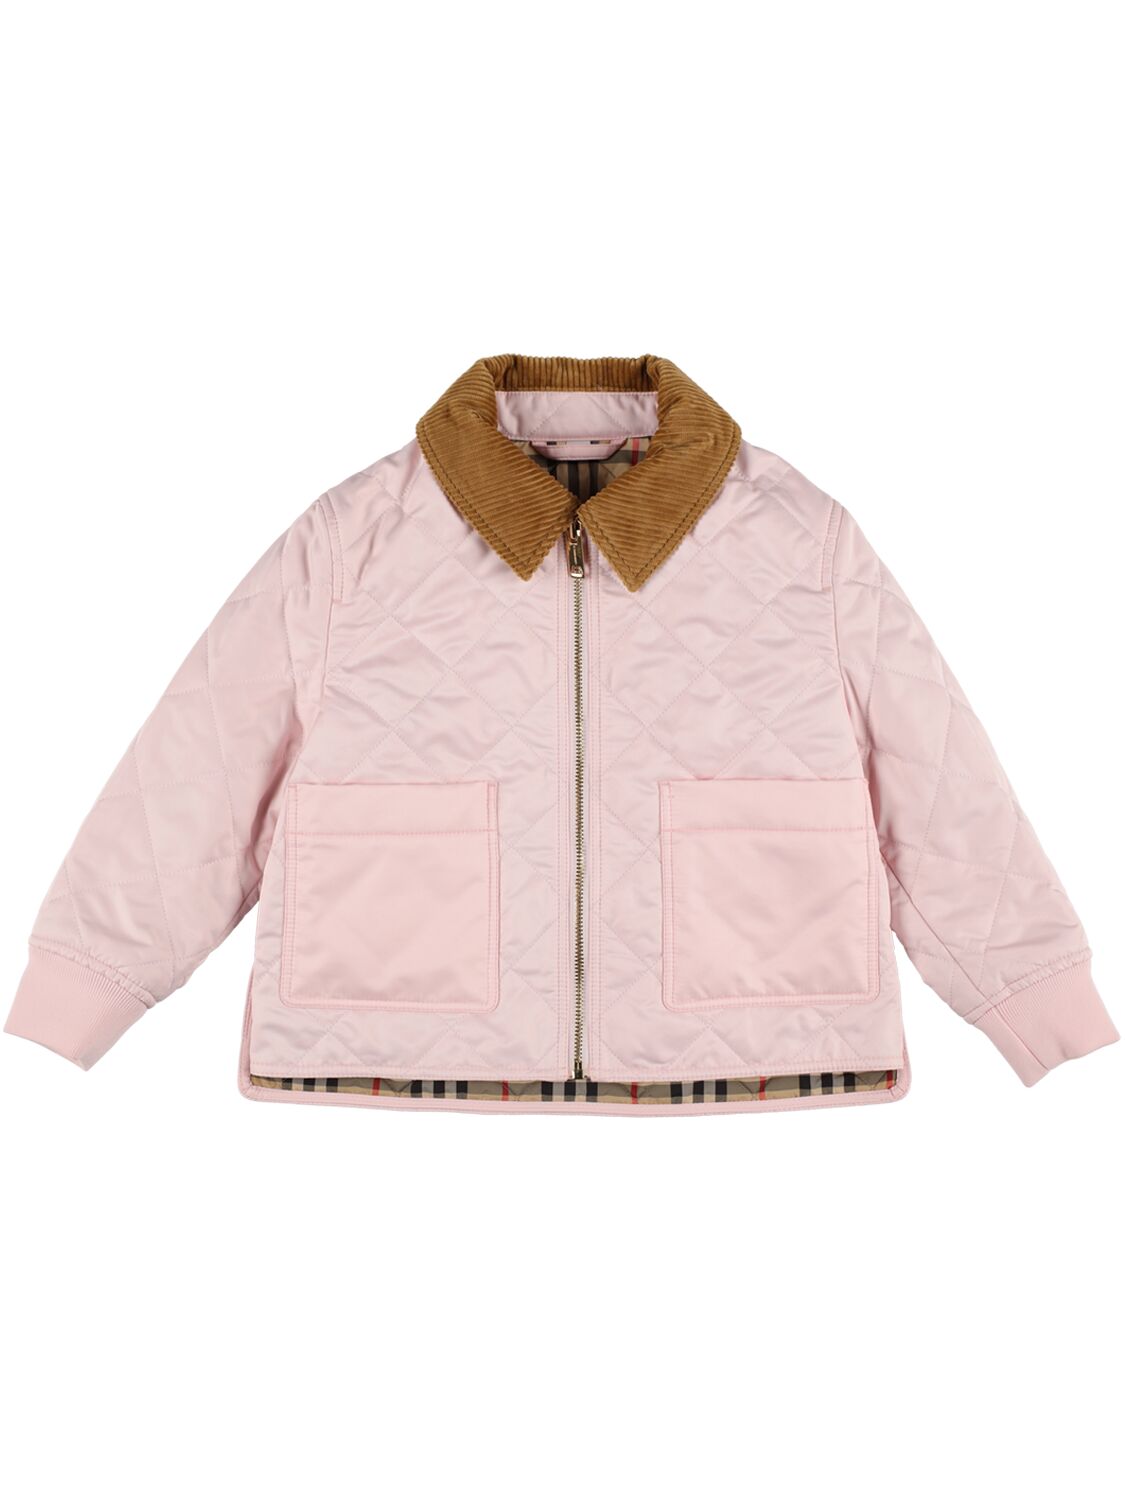 Image of Quilted Jacket W/ Check Lining